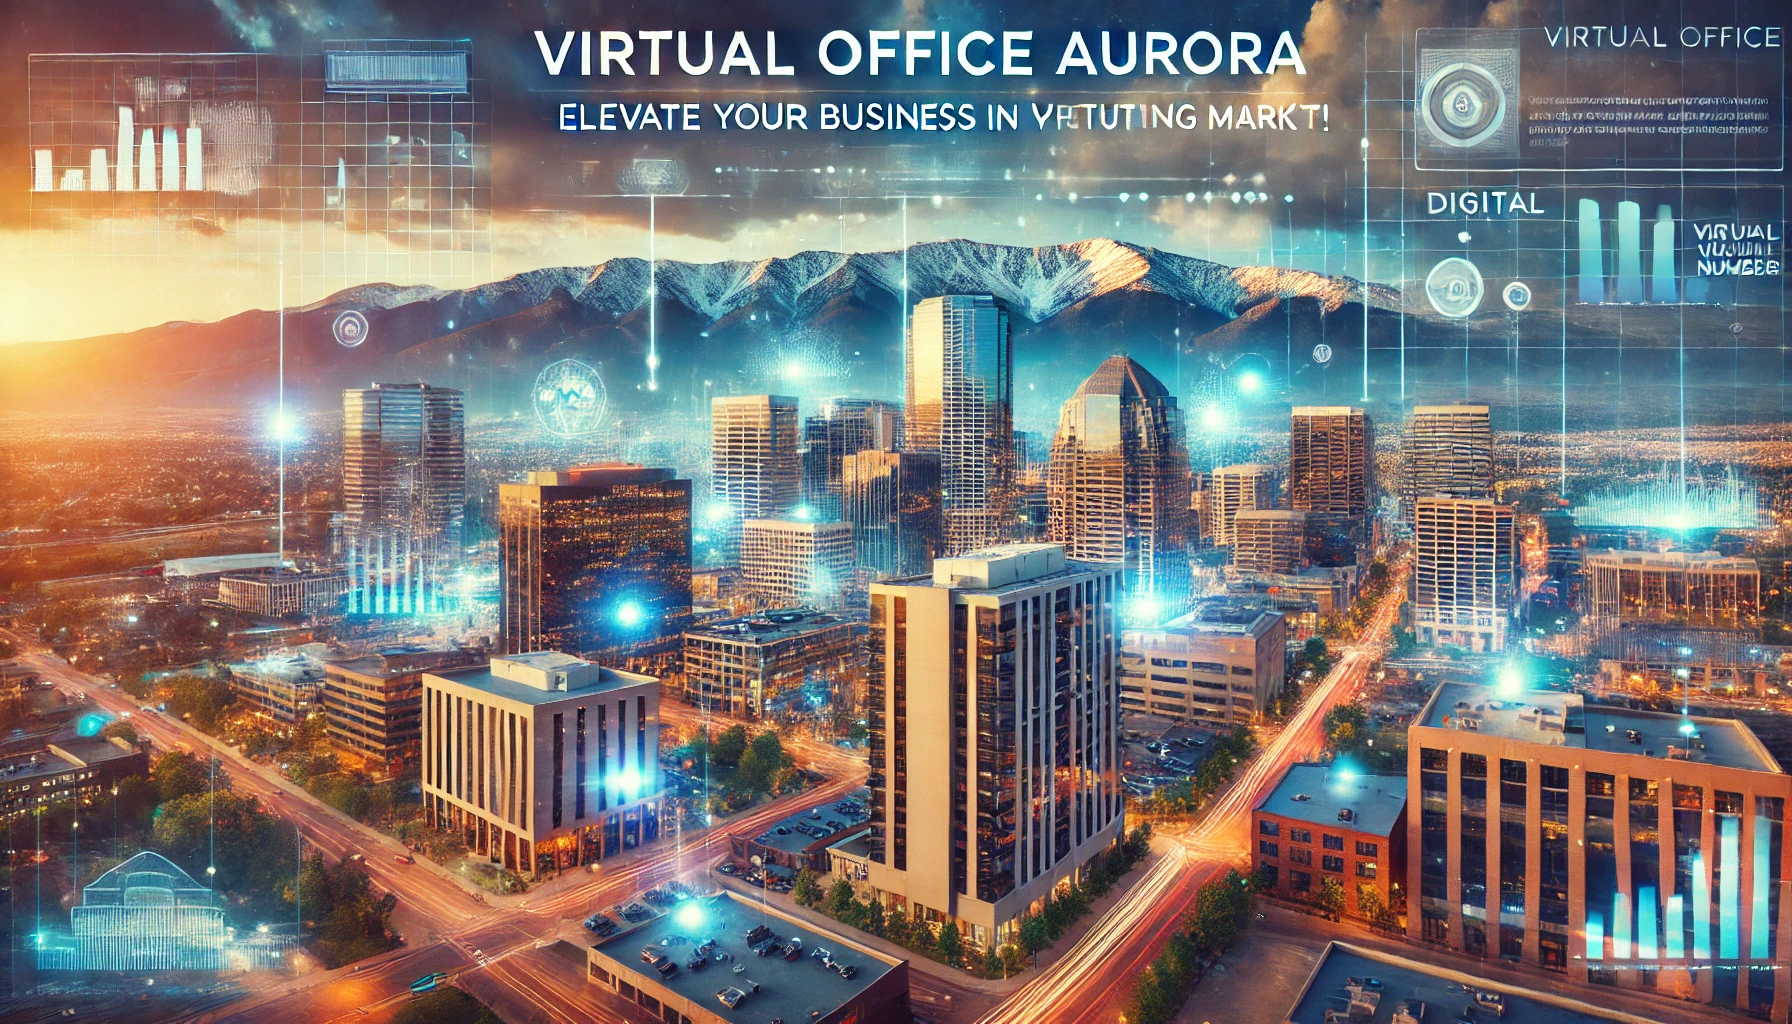 Aurora cityscape with mountains, modern office buildings, and digital overlays representing virtual office services.